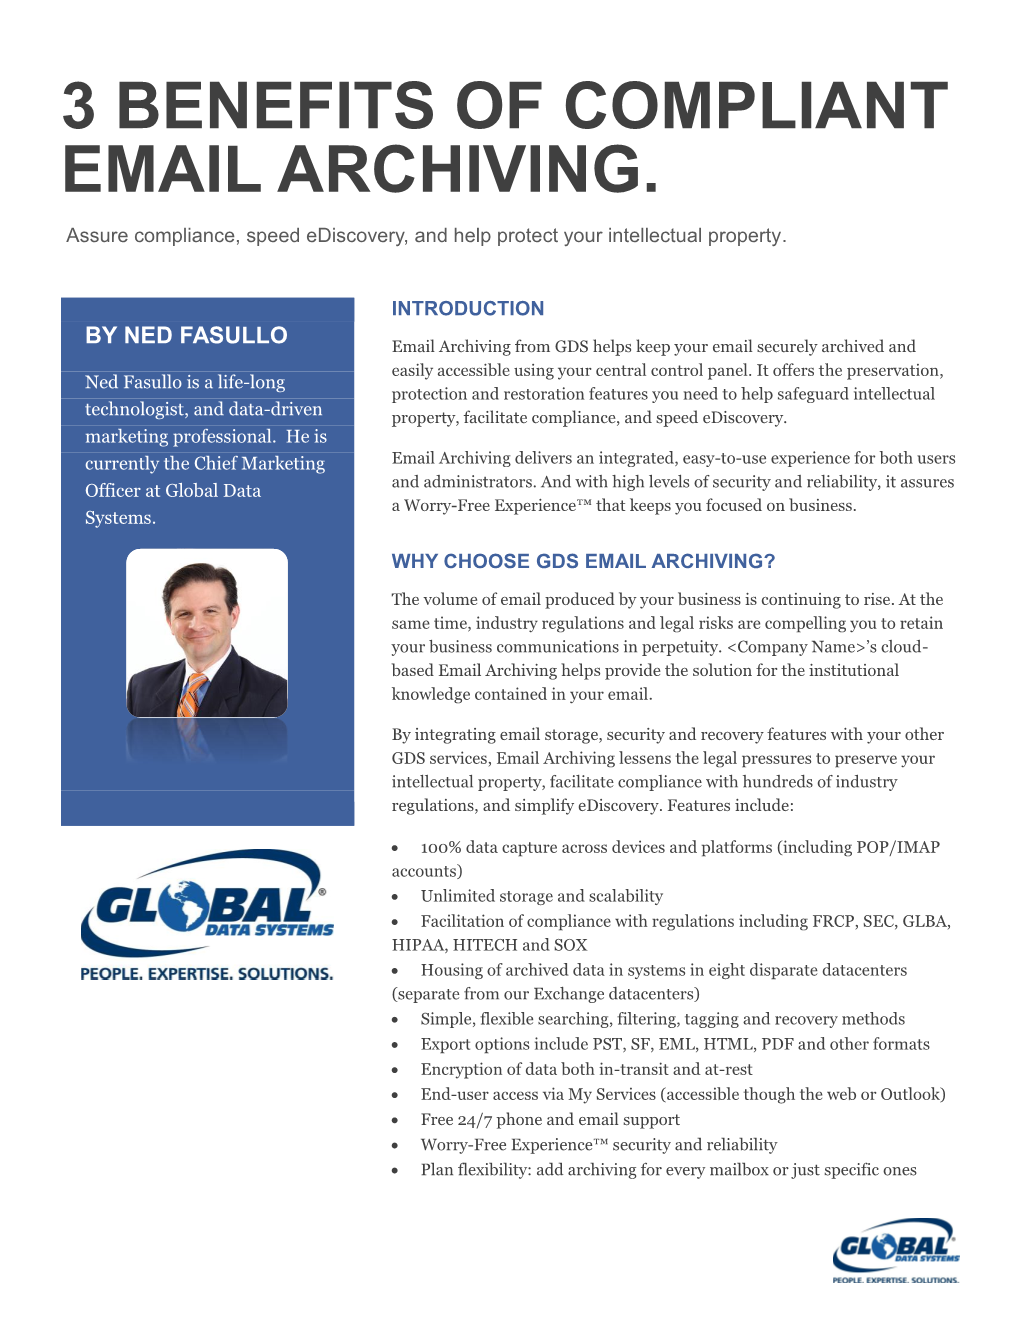 3 Benefits of Compliant Email Archiving